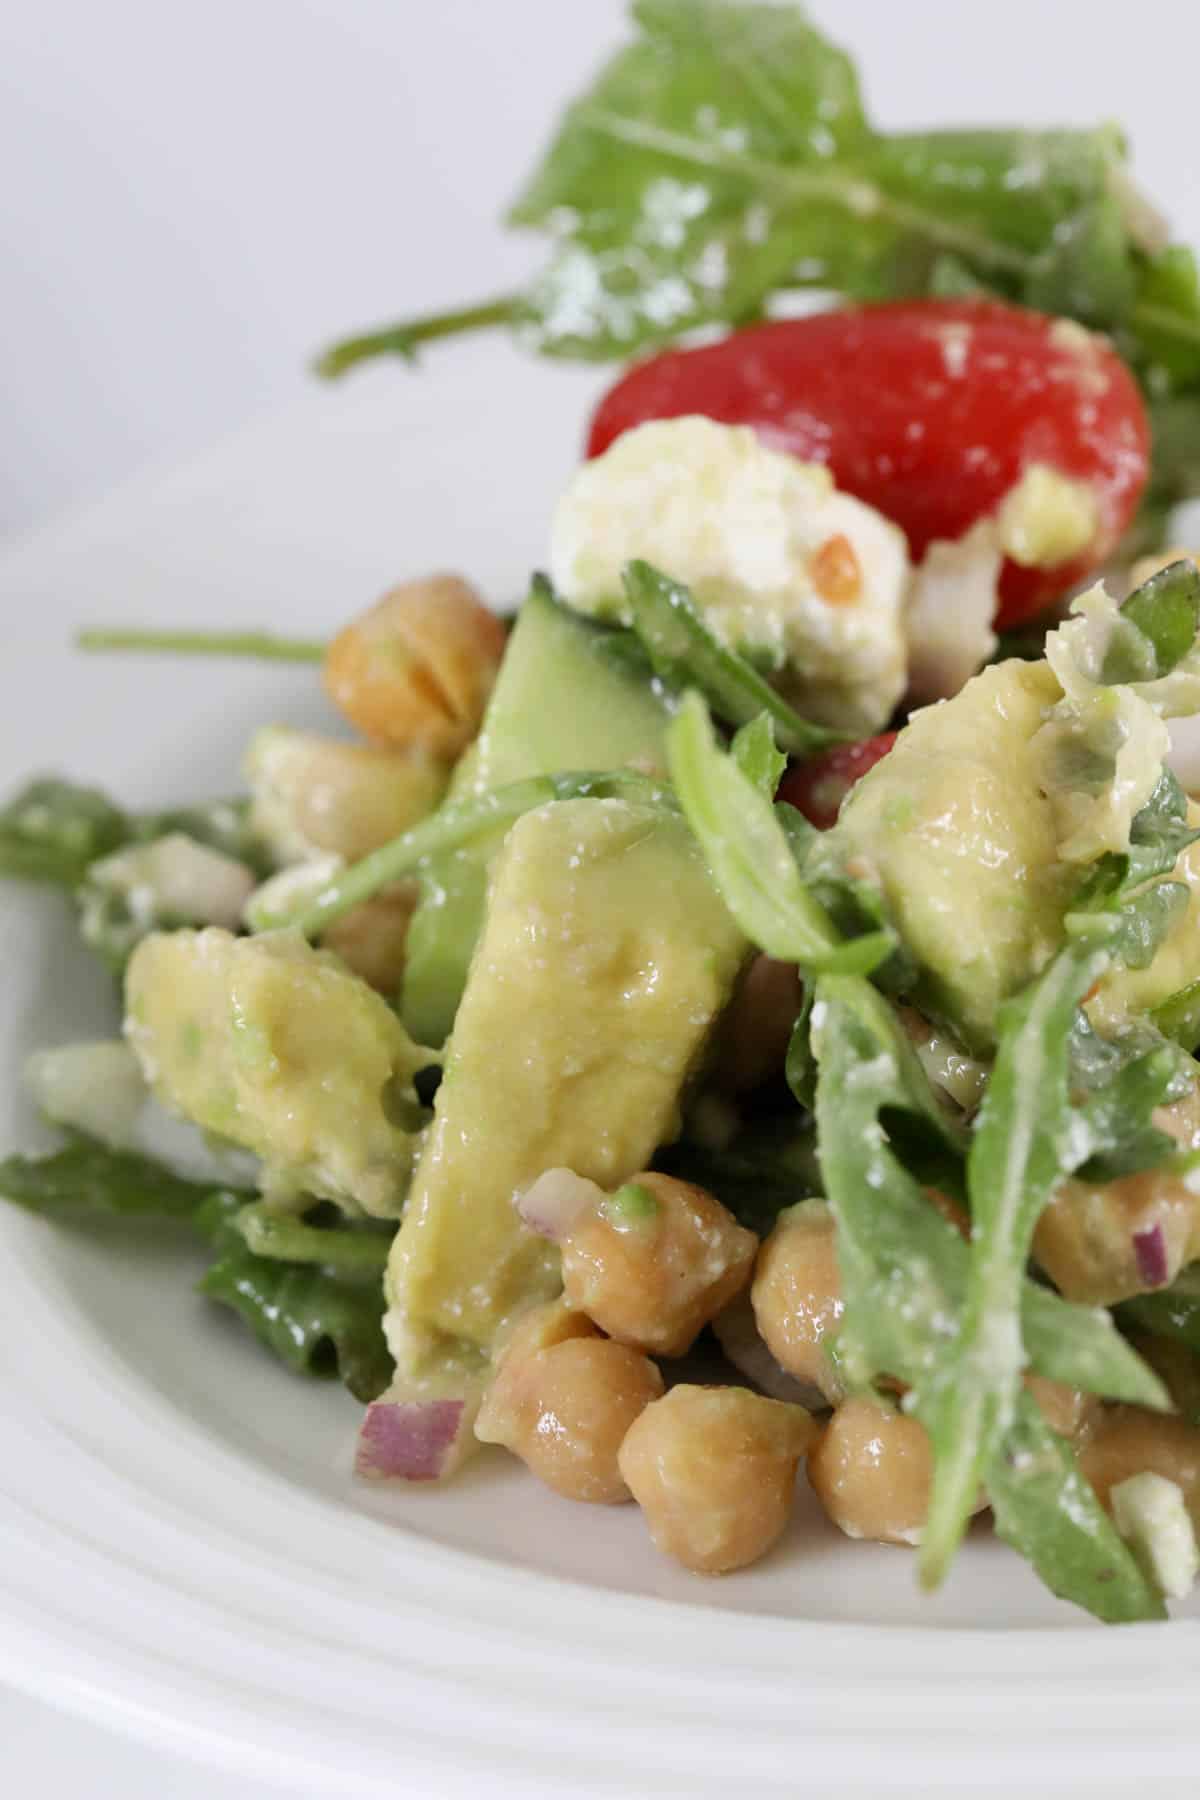 A serving of chickpea salad with avocado and rocket on a white serving plate.